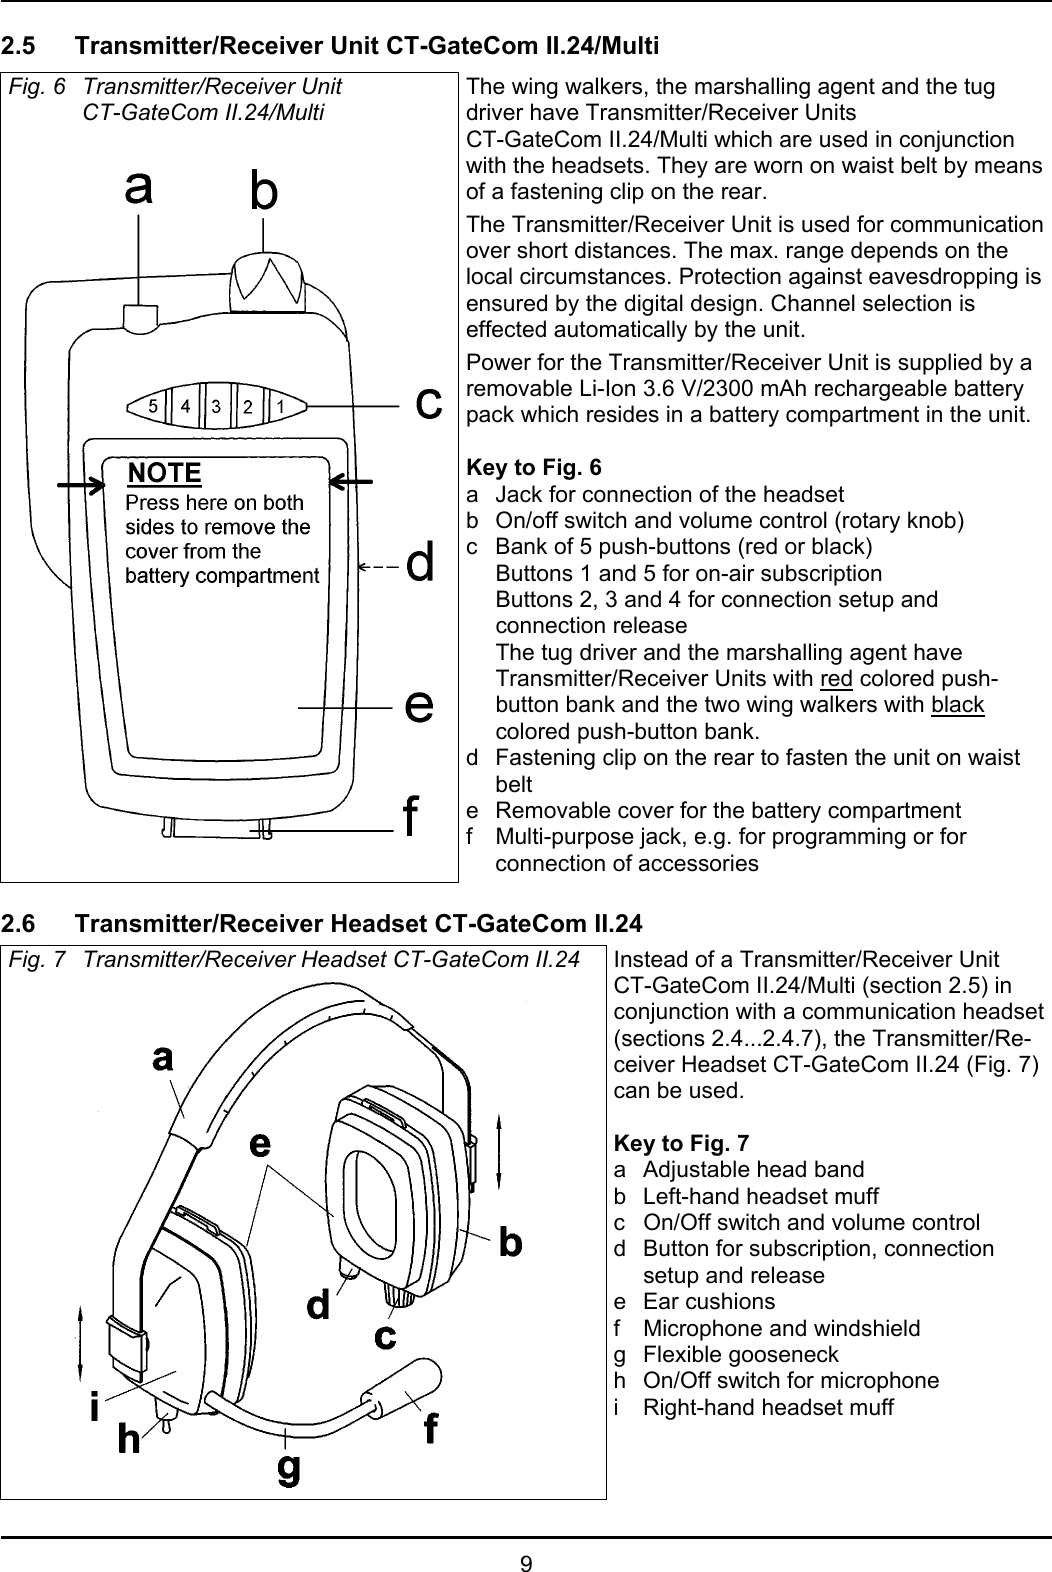 92.5 Transmitter/Receiver Unit CT-GateCom II.24/MultiFig. 6 Transmitter/Receiver UnitCT-GateCom II.24/MultiThe wing walkers, the marshalling agent and the tugdriver have Transmitter/Receiver UnitsCT-GateCom II.24/Multi which are used in conjunctionwith the headsets. They are worn on waist belt by meansof a fastening clip on the rear.The Transmitter/Receiver Unit is used for communicationover short distances. The max. range depends on thelocal circumstances. Protection against eavesdropping isensured by the digital design. Channel selection iseffected automatically by the unit.Power for the Transmitter/Receiver Unit is supplied by aremovable Li-Ion 3.6 V/2300 mAh rechargeable batterypack which resides in a battery compartment in the unit. Key to Fig. 6a Jack for connection of the headsetb On/off switch and volume control (rotary knob)c Bank of 5 push-buttons (red or black)Buttons 1 and 5 for on-air subscriptionButtons 2, 3 and 4 for connection setup andconnection releaseThe tug driver and the marshalling agent haveTransmitter/Receiver Units with red colored push-button bank and the two wing walkers with blackcolored push-button bank.d Fastening clip on the rear to fasten the unit on waistbelte Removable cover for the battery compartmentf Multi-purpose jack, e.g. for programming or forconnection of accessories 2.6 Transmitter/Receiver Headset CT-GateCom II.24Fig. 7 Transmitter/Receiver Headset CT-GateCom II.24 Instead of a Transmitter/Receiver UnitCT-GateCom II.24/Multi (section 2.5) inconjunction with a communication headset(sections 2.4...2.4.7), the Transmitter/Re-ceiver Headset CT-GateCom II.24 (Fig. 7)can be used.Key to Fig. 7a Adjustable head bandb Left-hand headset muffc On/Off switch and volume controld Button for subscription, connectionsetup and releasee Ear cushionsf Microphone and windshieldg Flexible gooseneckh On/Off switch for microphonei Right-hand headset muff